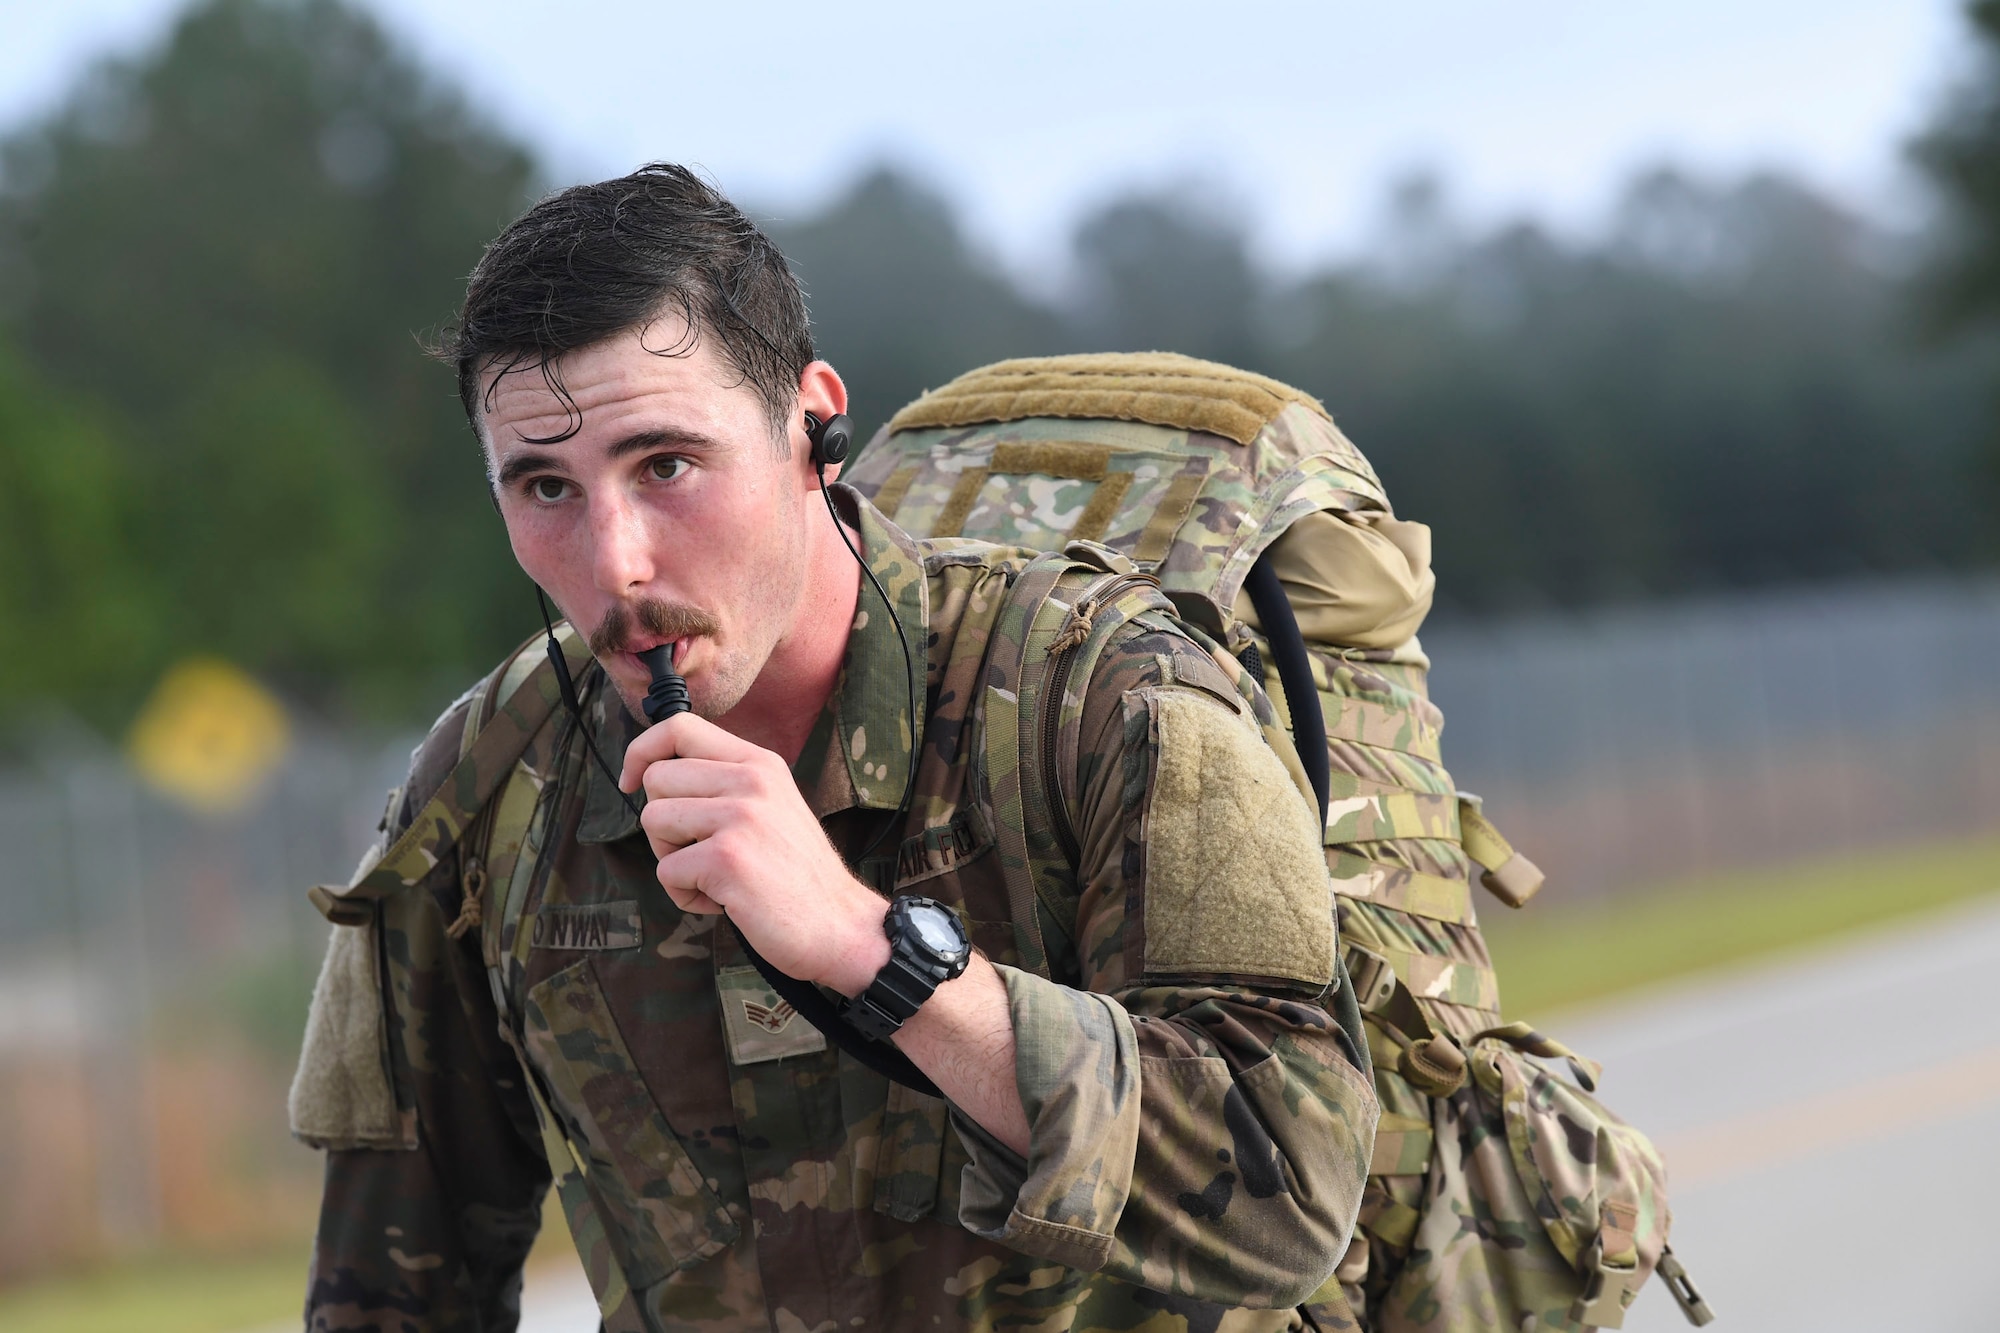 Senior Airman Aaron Conway from the 14th Air Support Operations Squadron sips water during the ruck march in the Dragon Challenge 2018 at Fort Bragg, North Carolina, Nov. 1, 2018. Dragon Challenge competitors had four hours to complete the 12-mile ruck march. The ruck march was one of the 11 events during the challenge. (U.S. Air Force photo by 1st Lt. Faith Brodkorb)